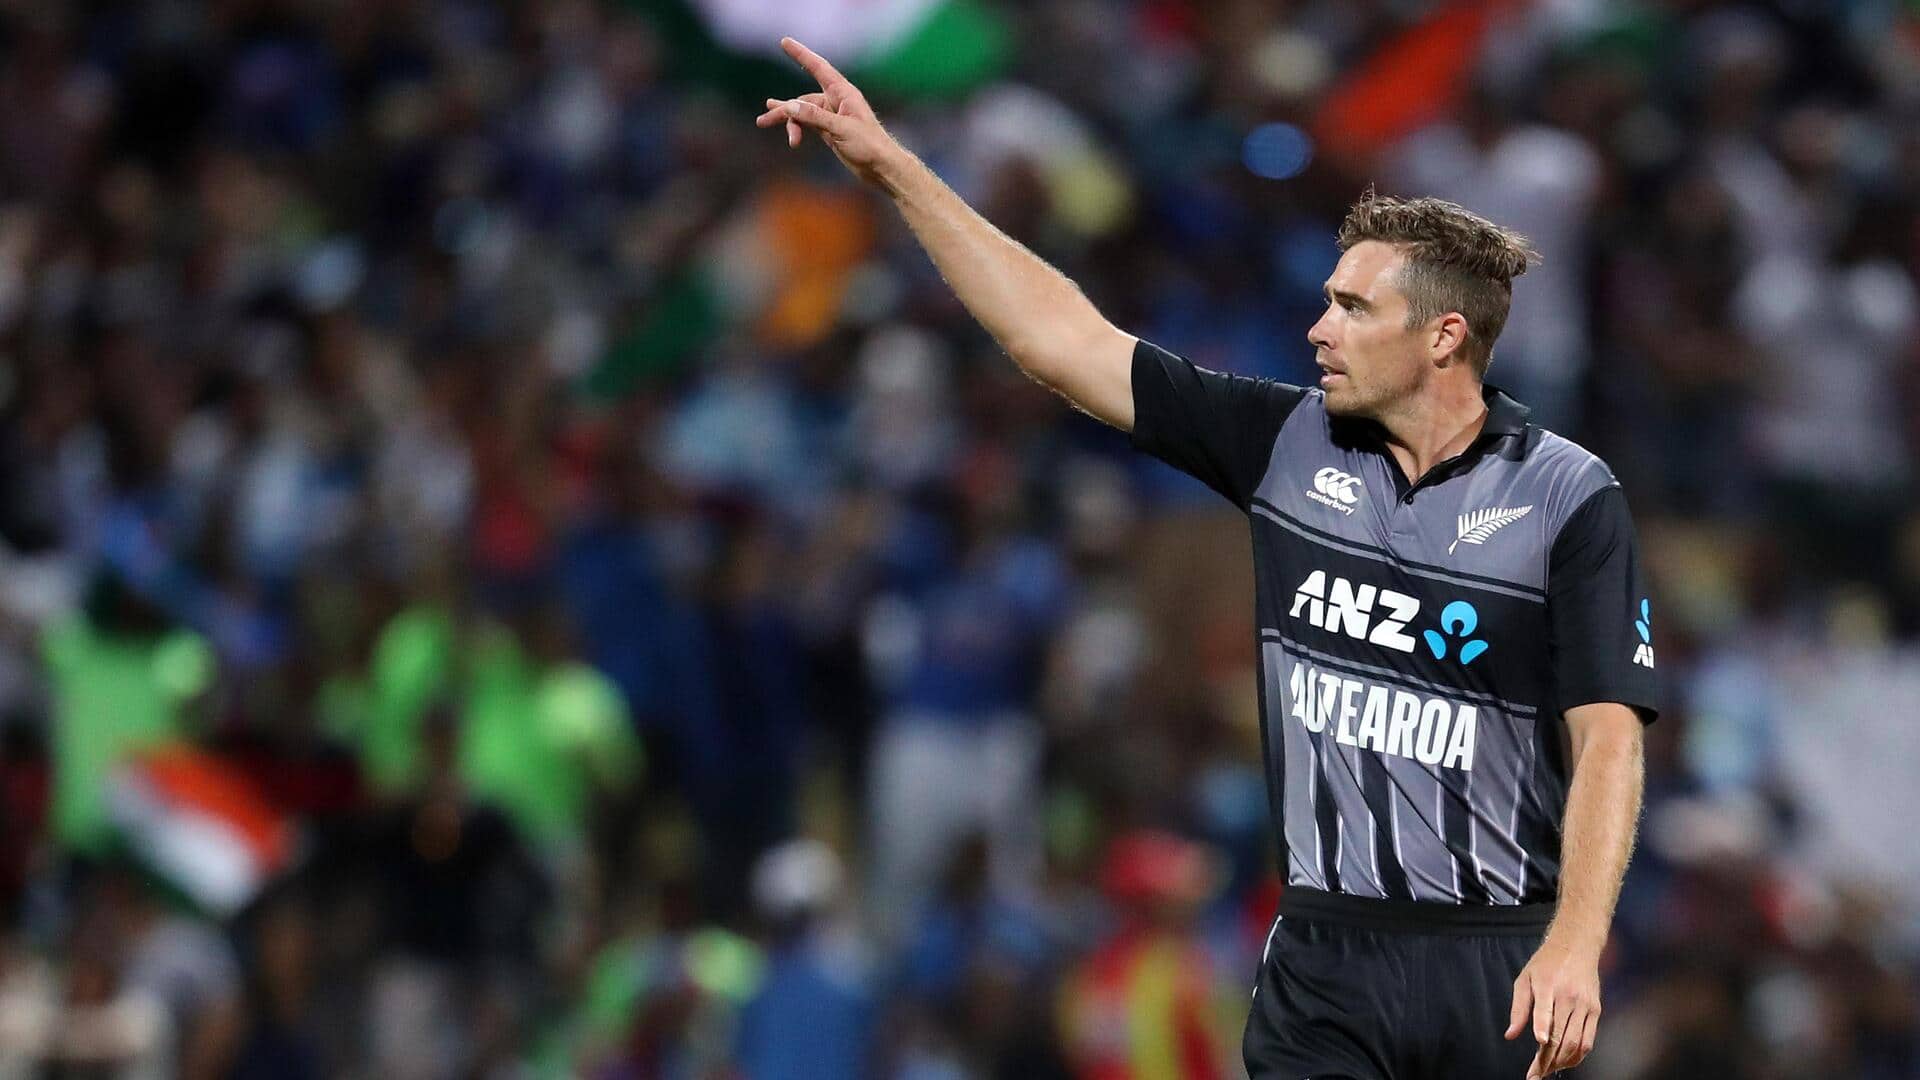 UAE vs New Zealand, T20Is: Here's the statistical preview